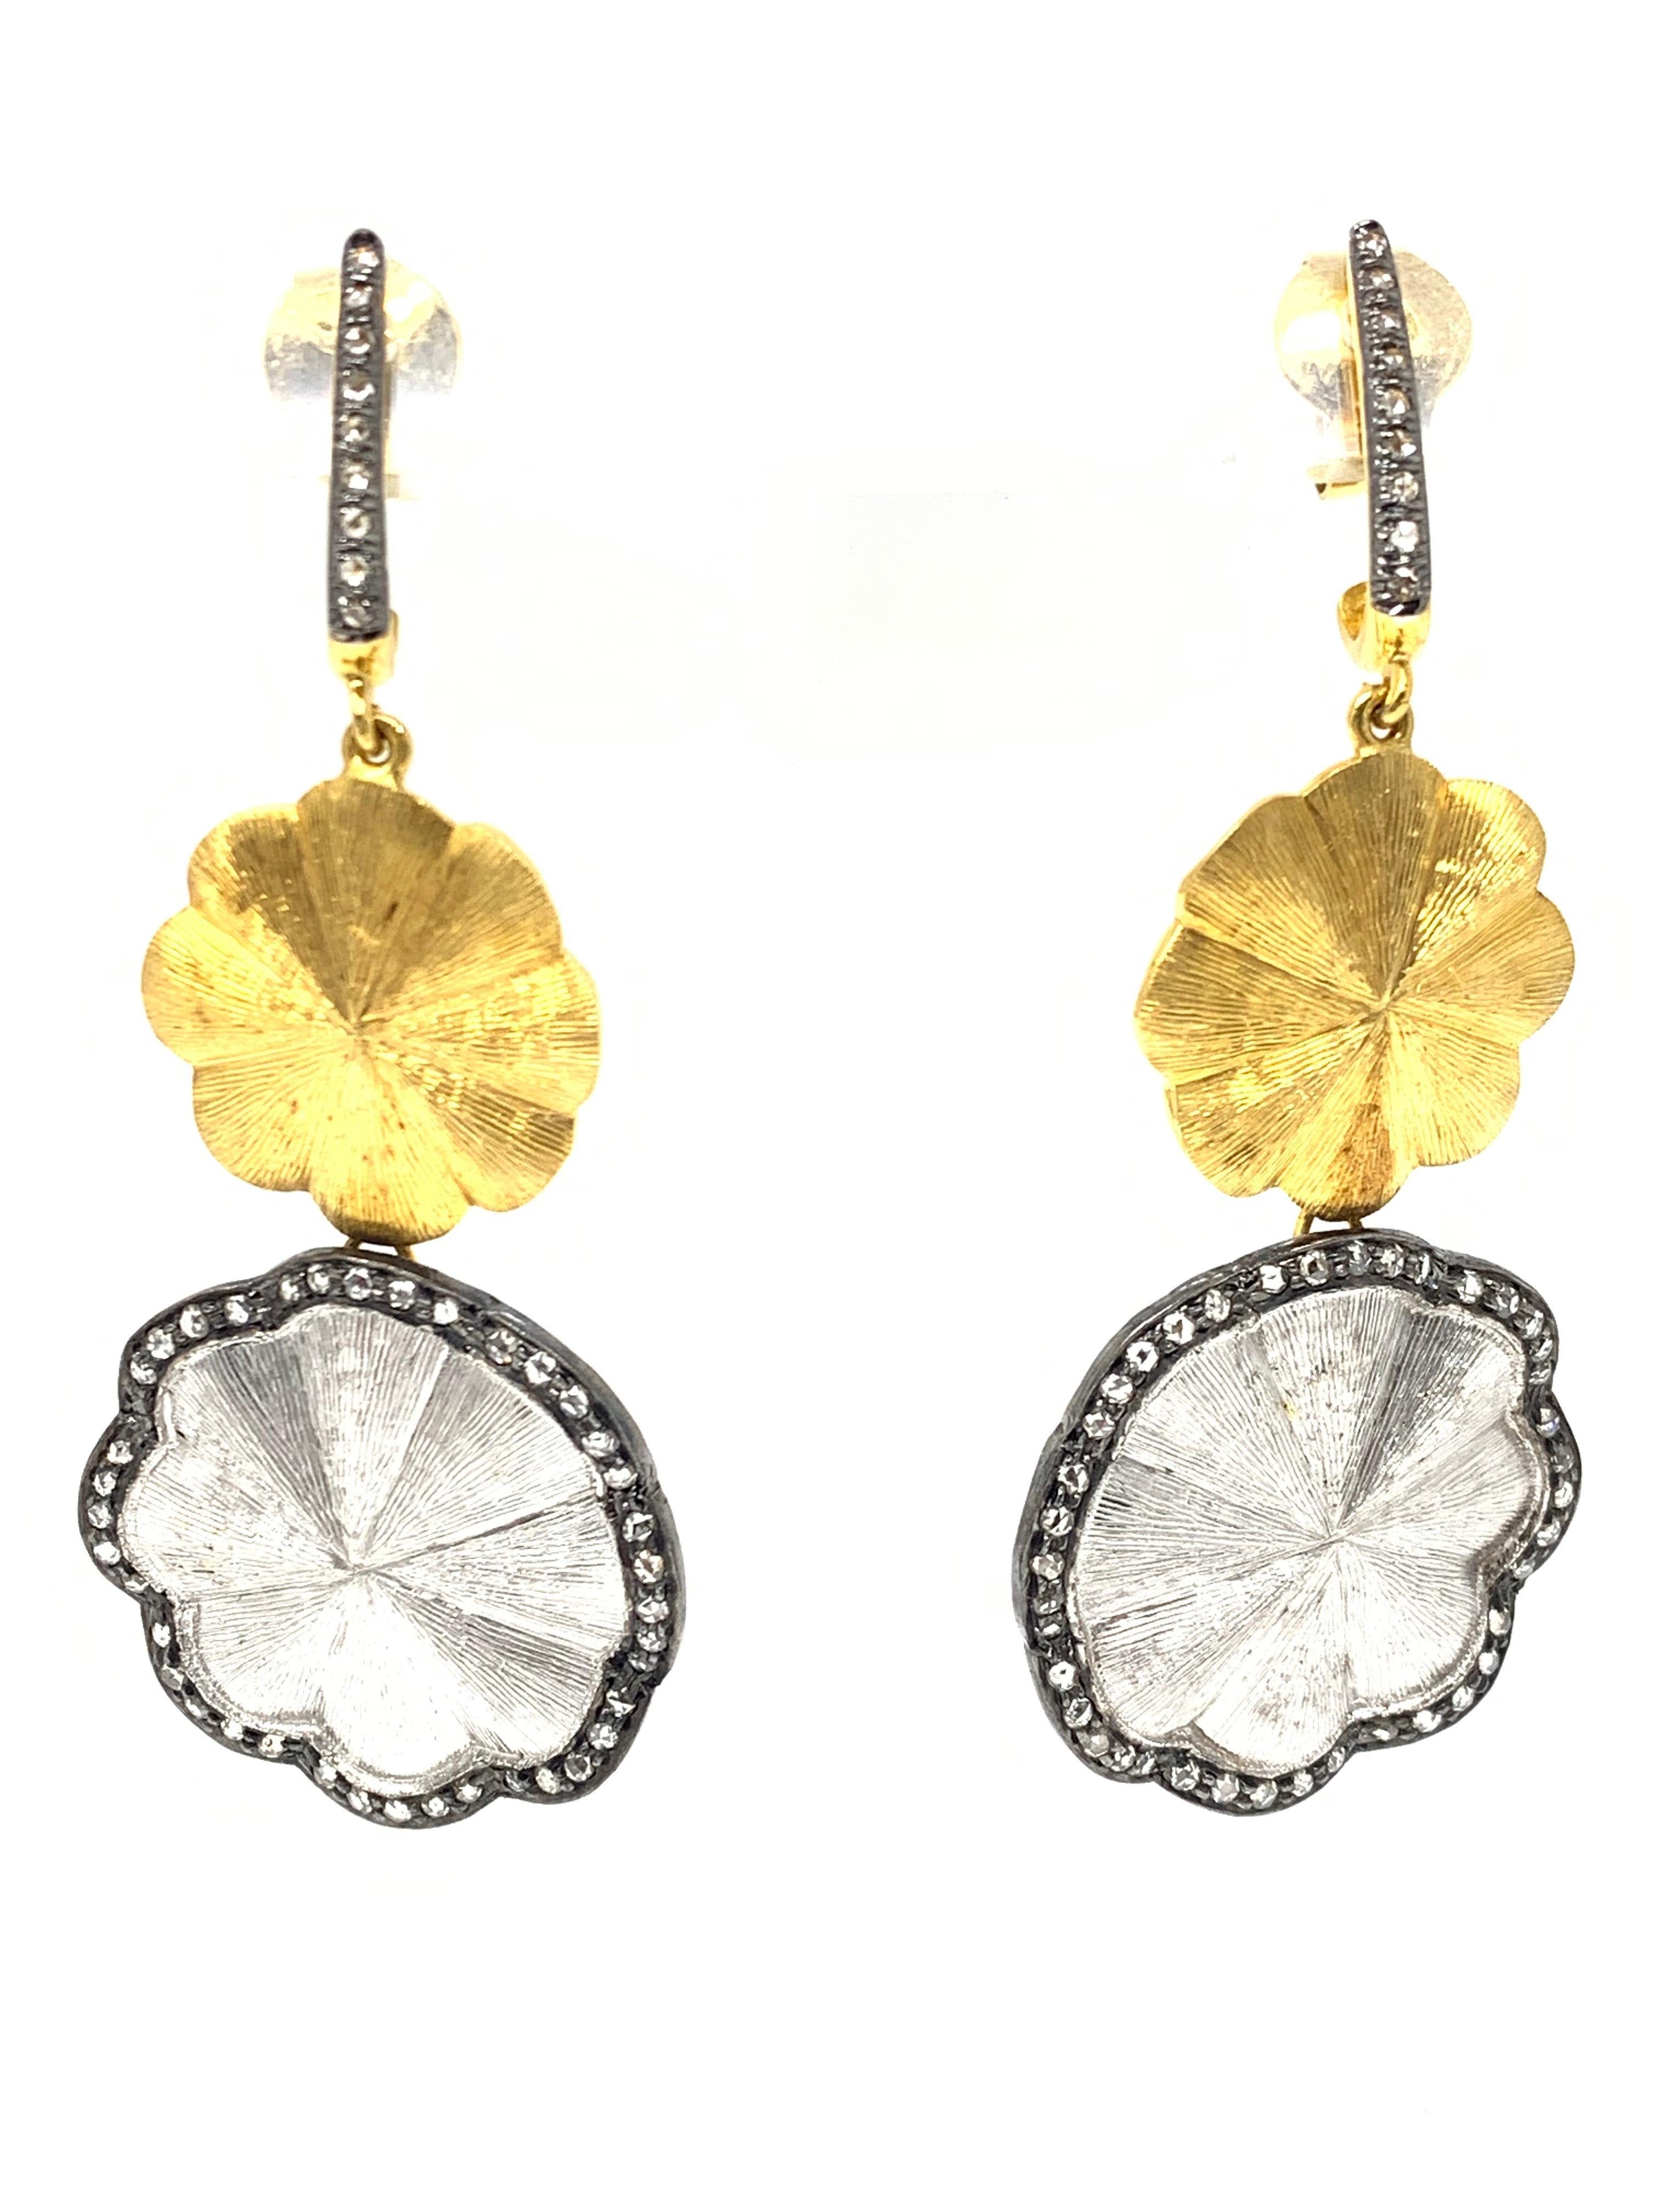 Contemporary White Rose Cut Diamond Chandelier Earrings in 18 Karat White and Yellow Gold For Sale